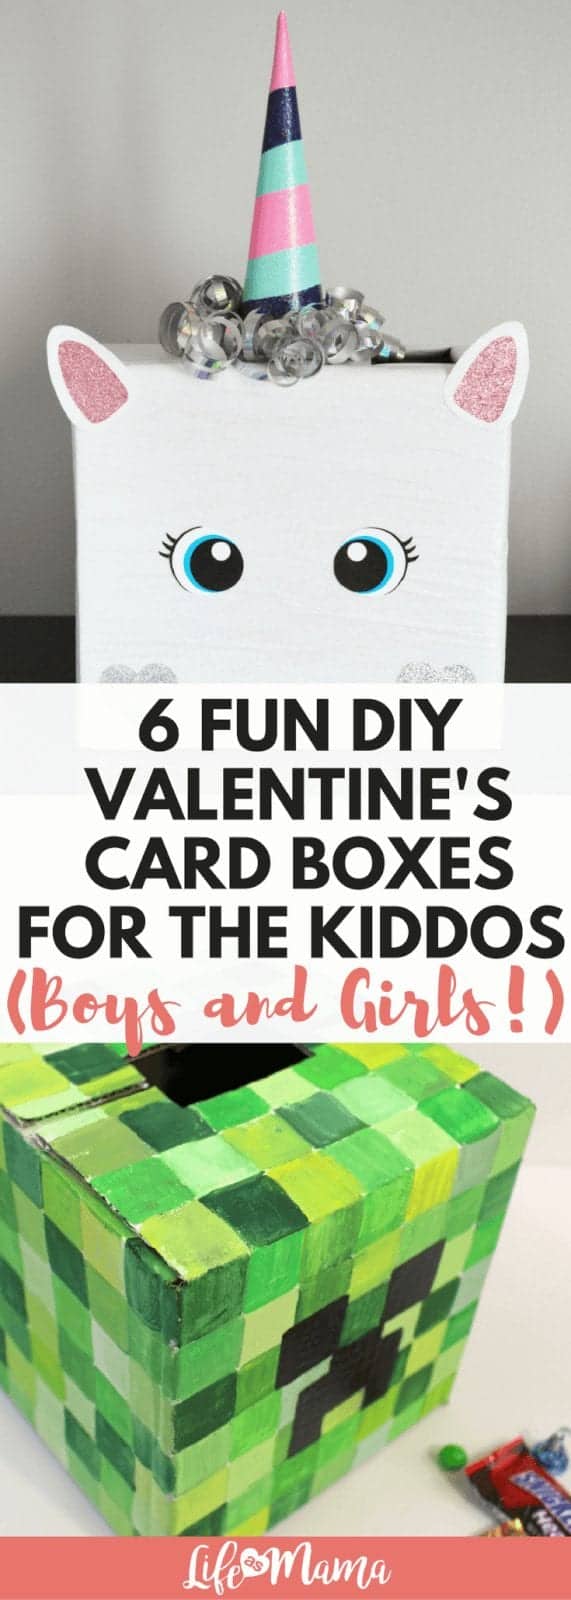 valentine's card boxes